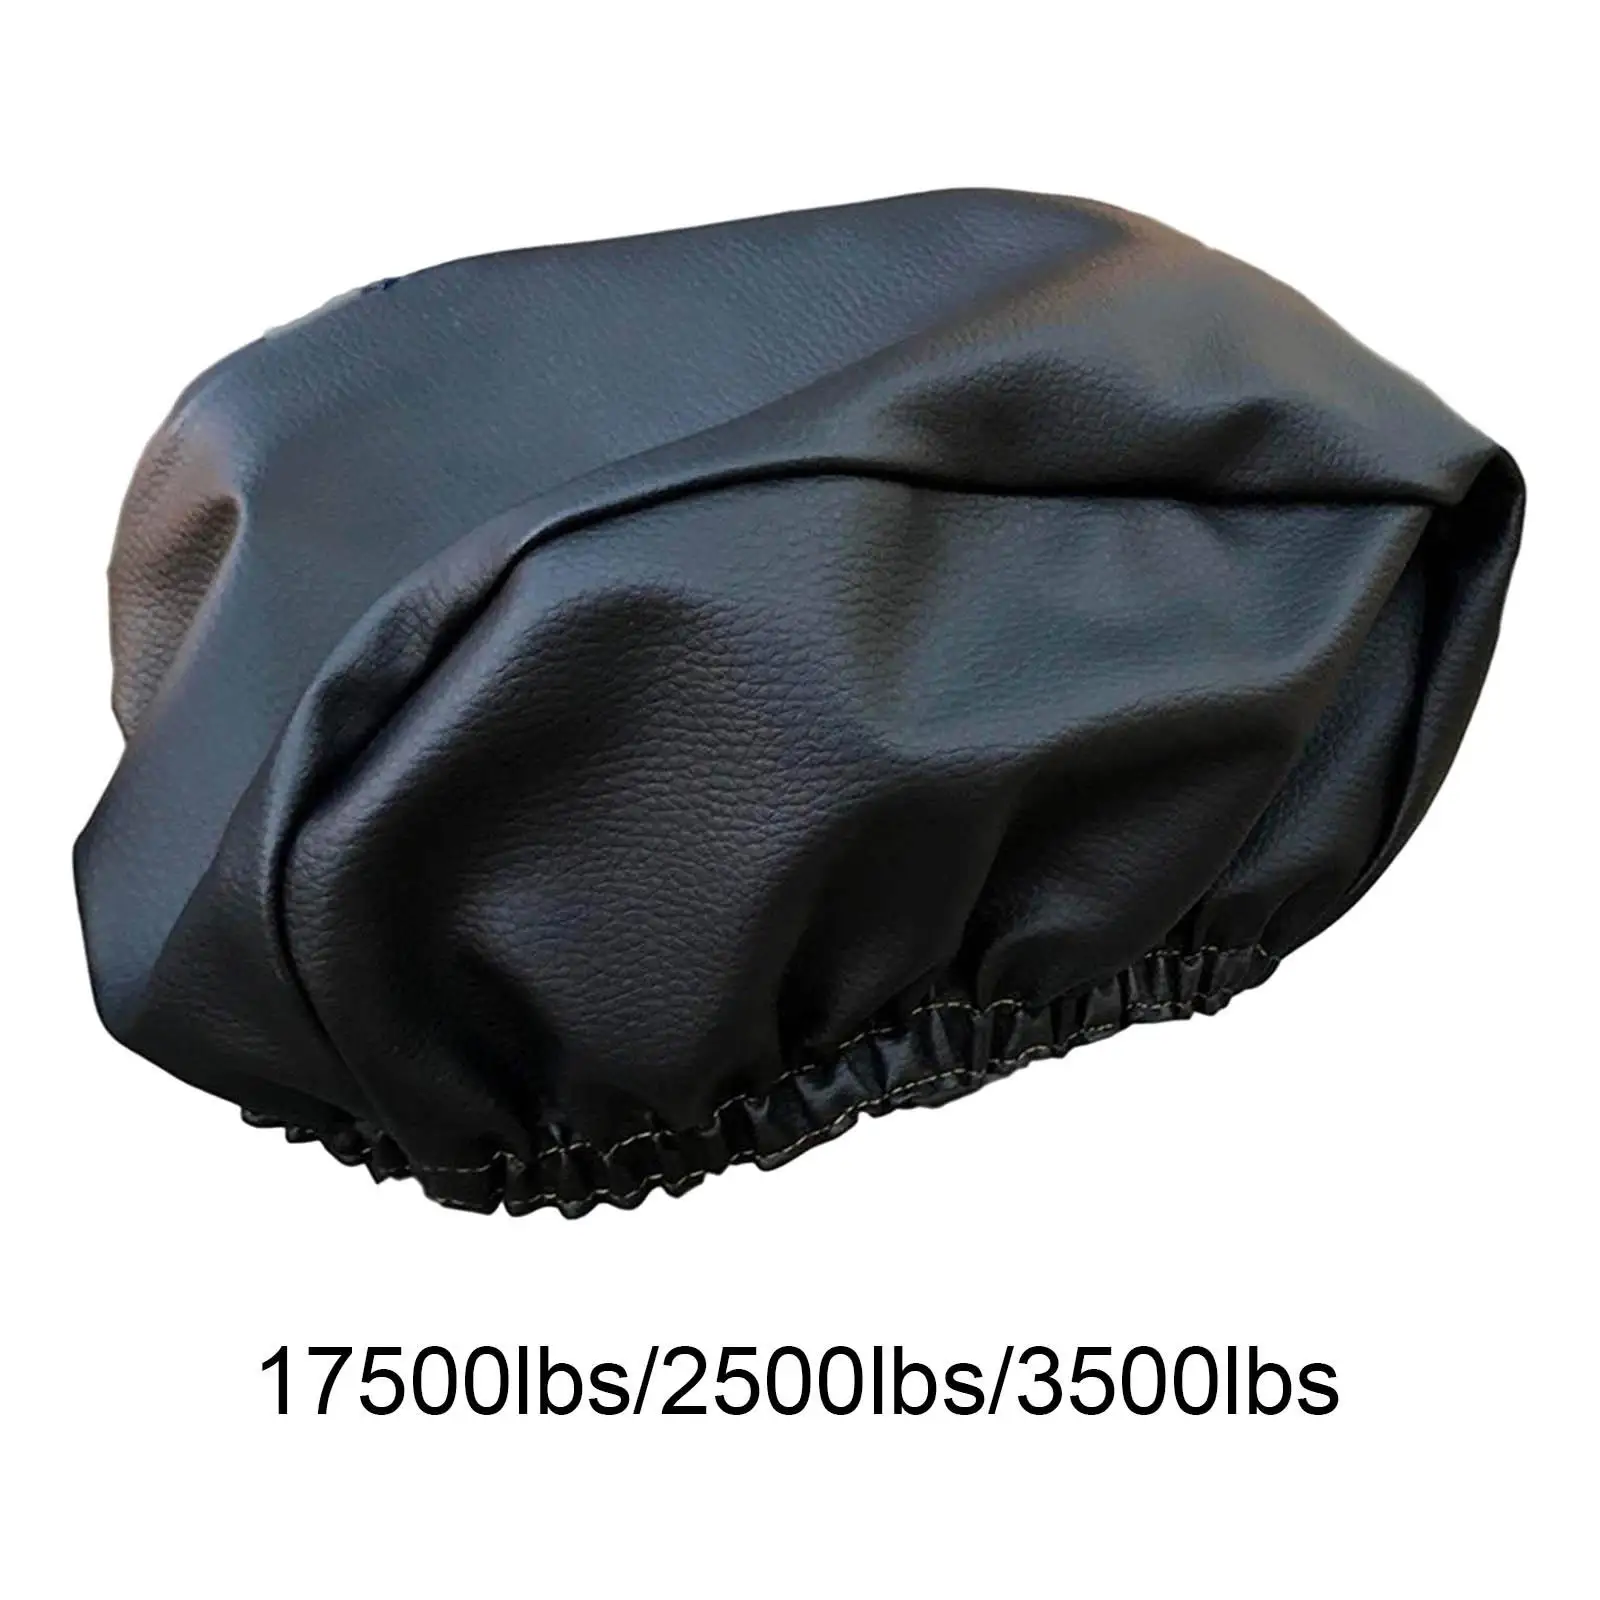 Car Winch Cover Heavy Duty Dustproof Waterproof Guard Protection Cover Dust Cover